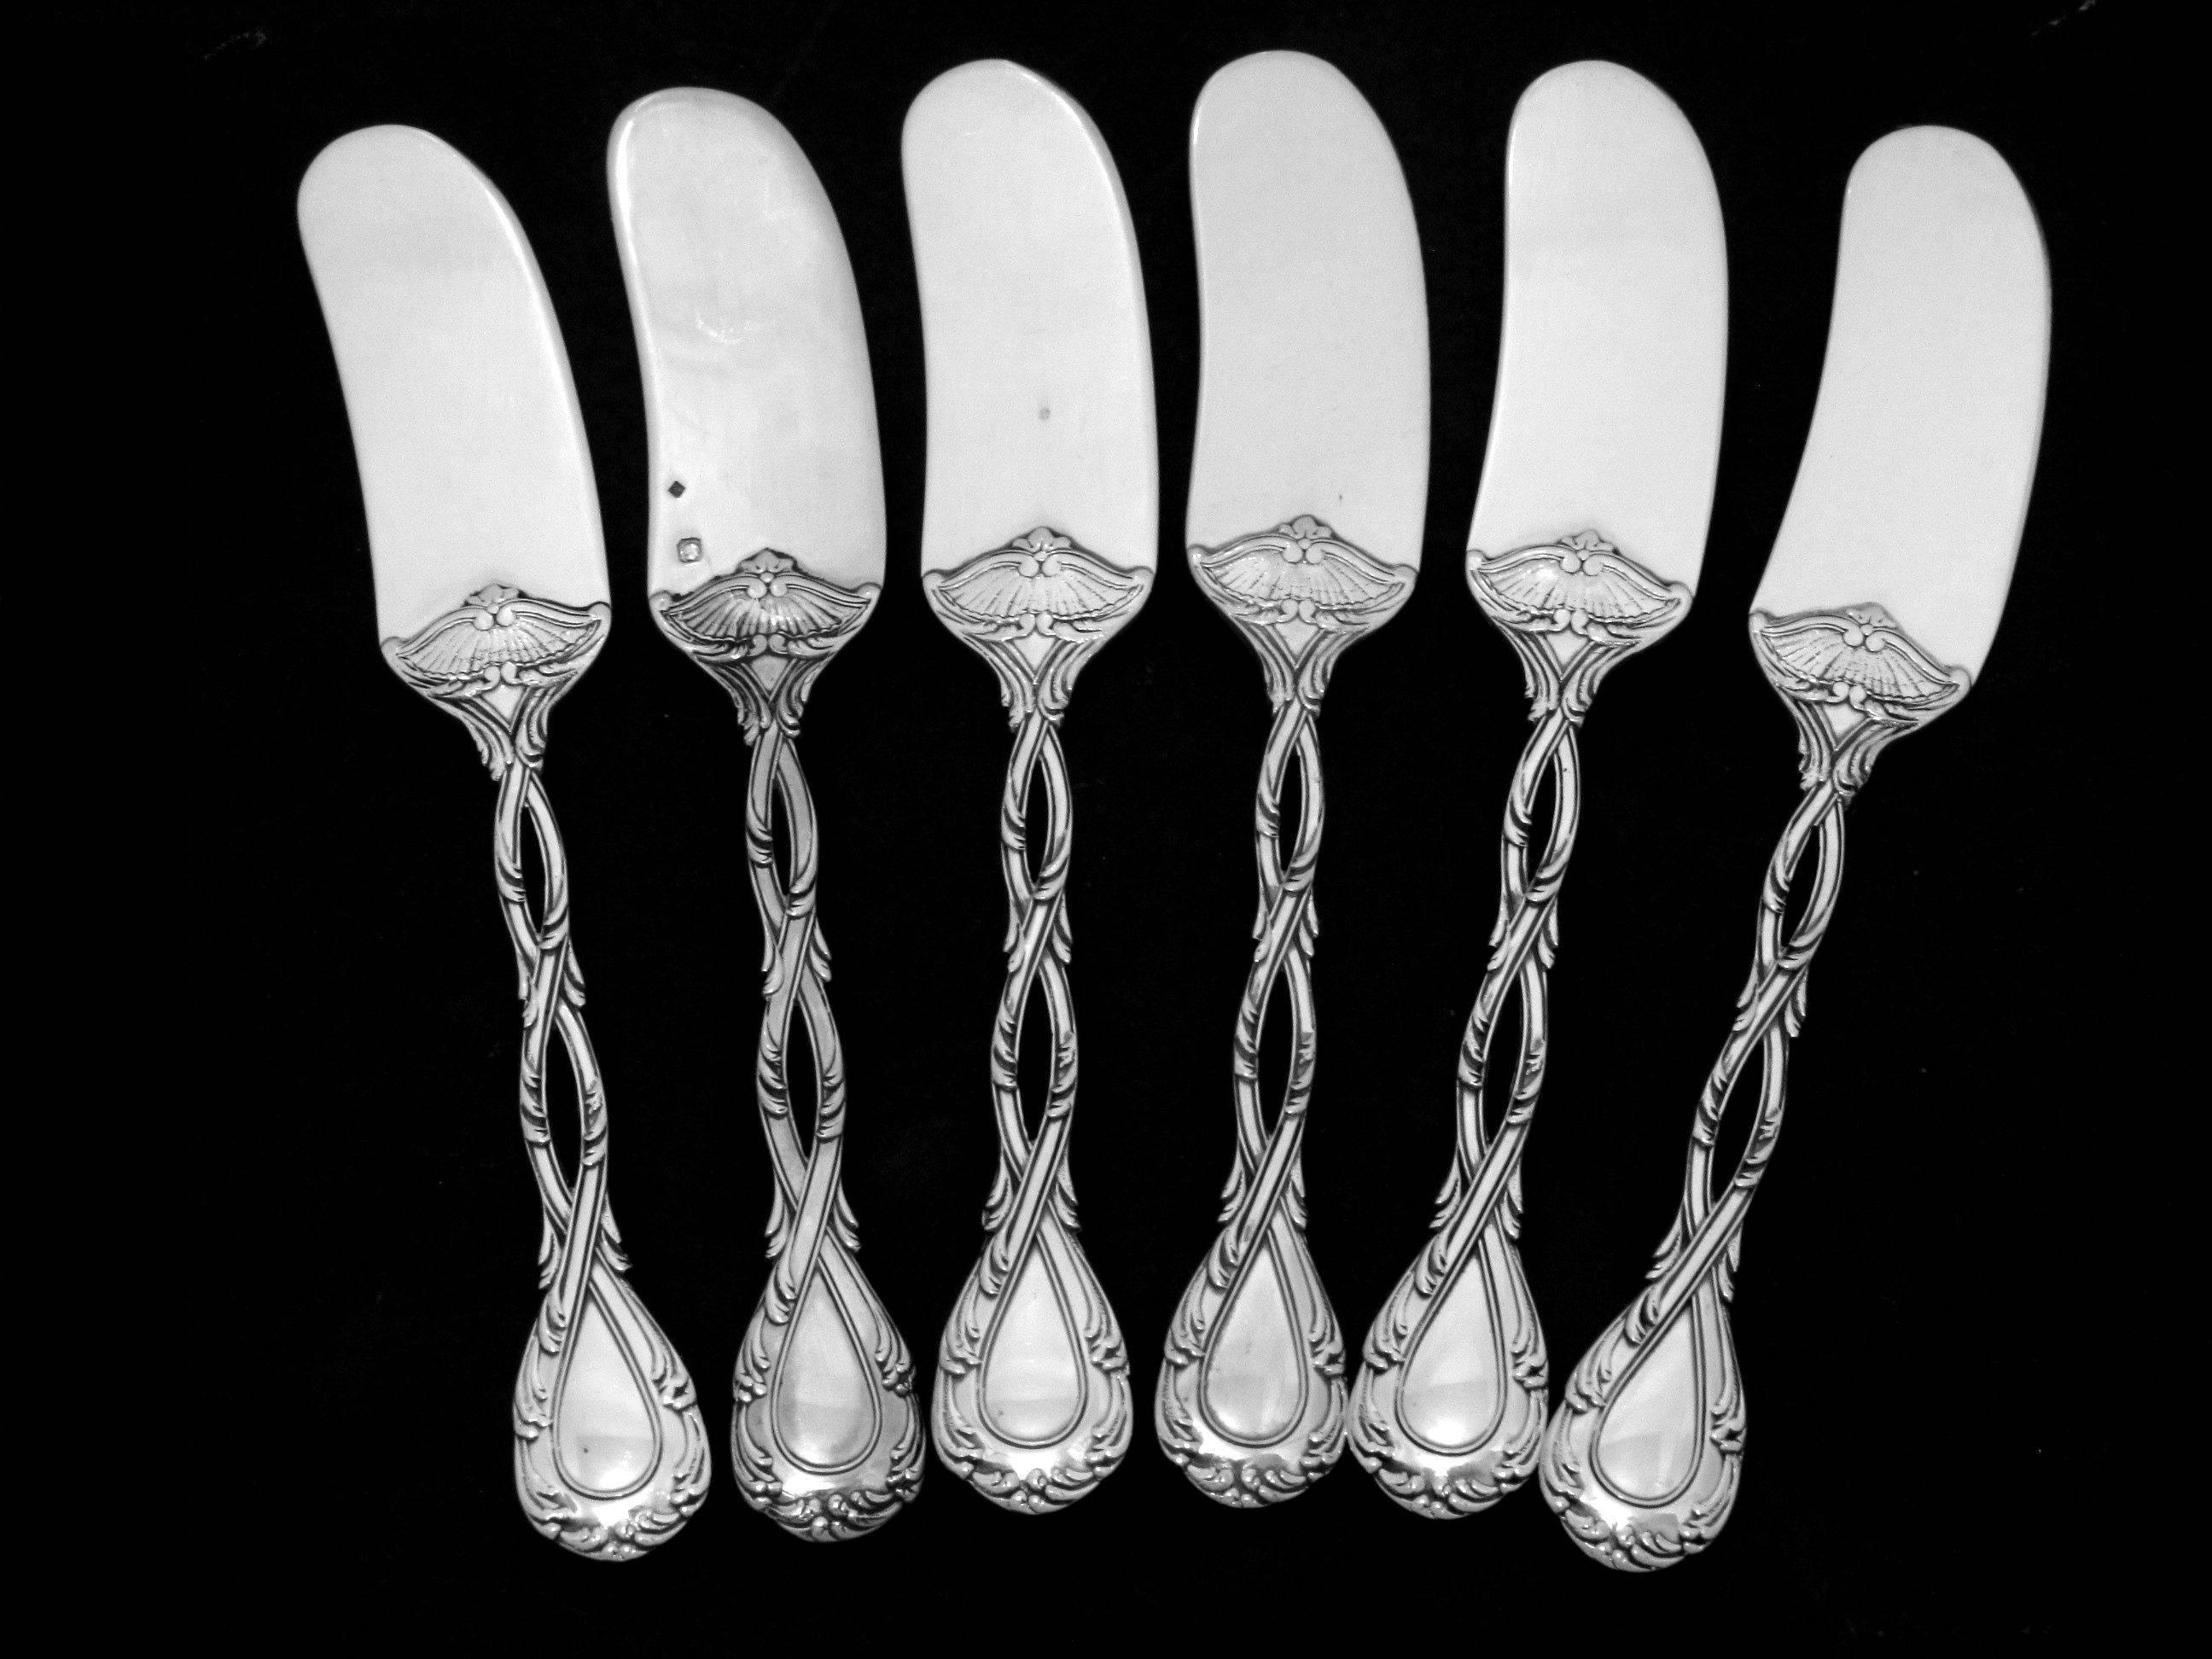 Odiot Tetard French All Sterling Silver Butter Spreader Set 6 pc Trianon pattern 4